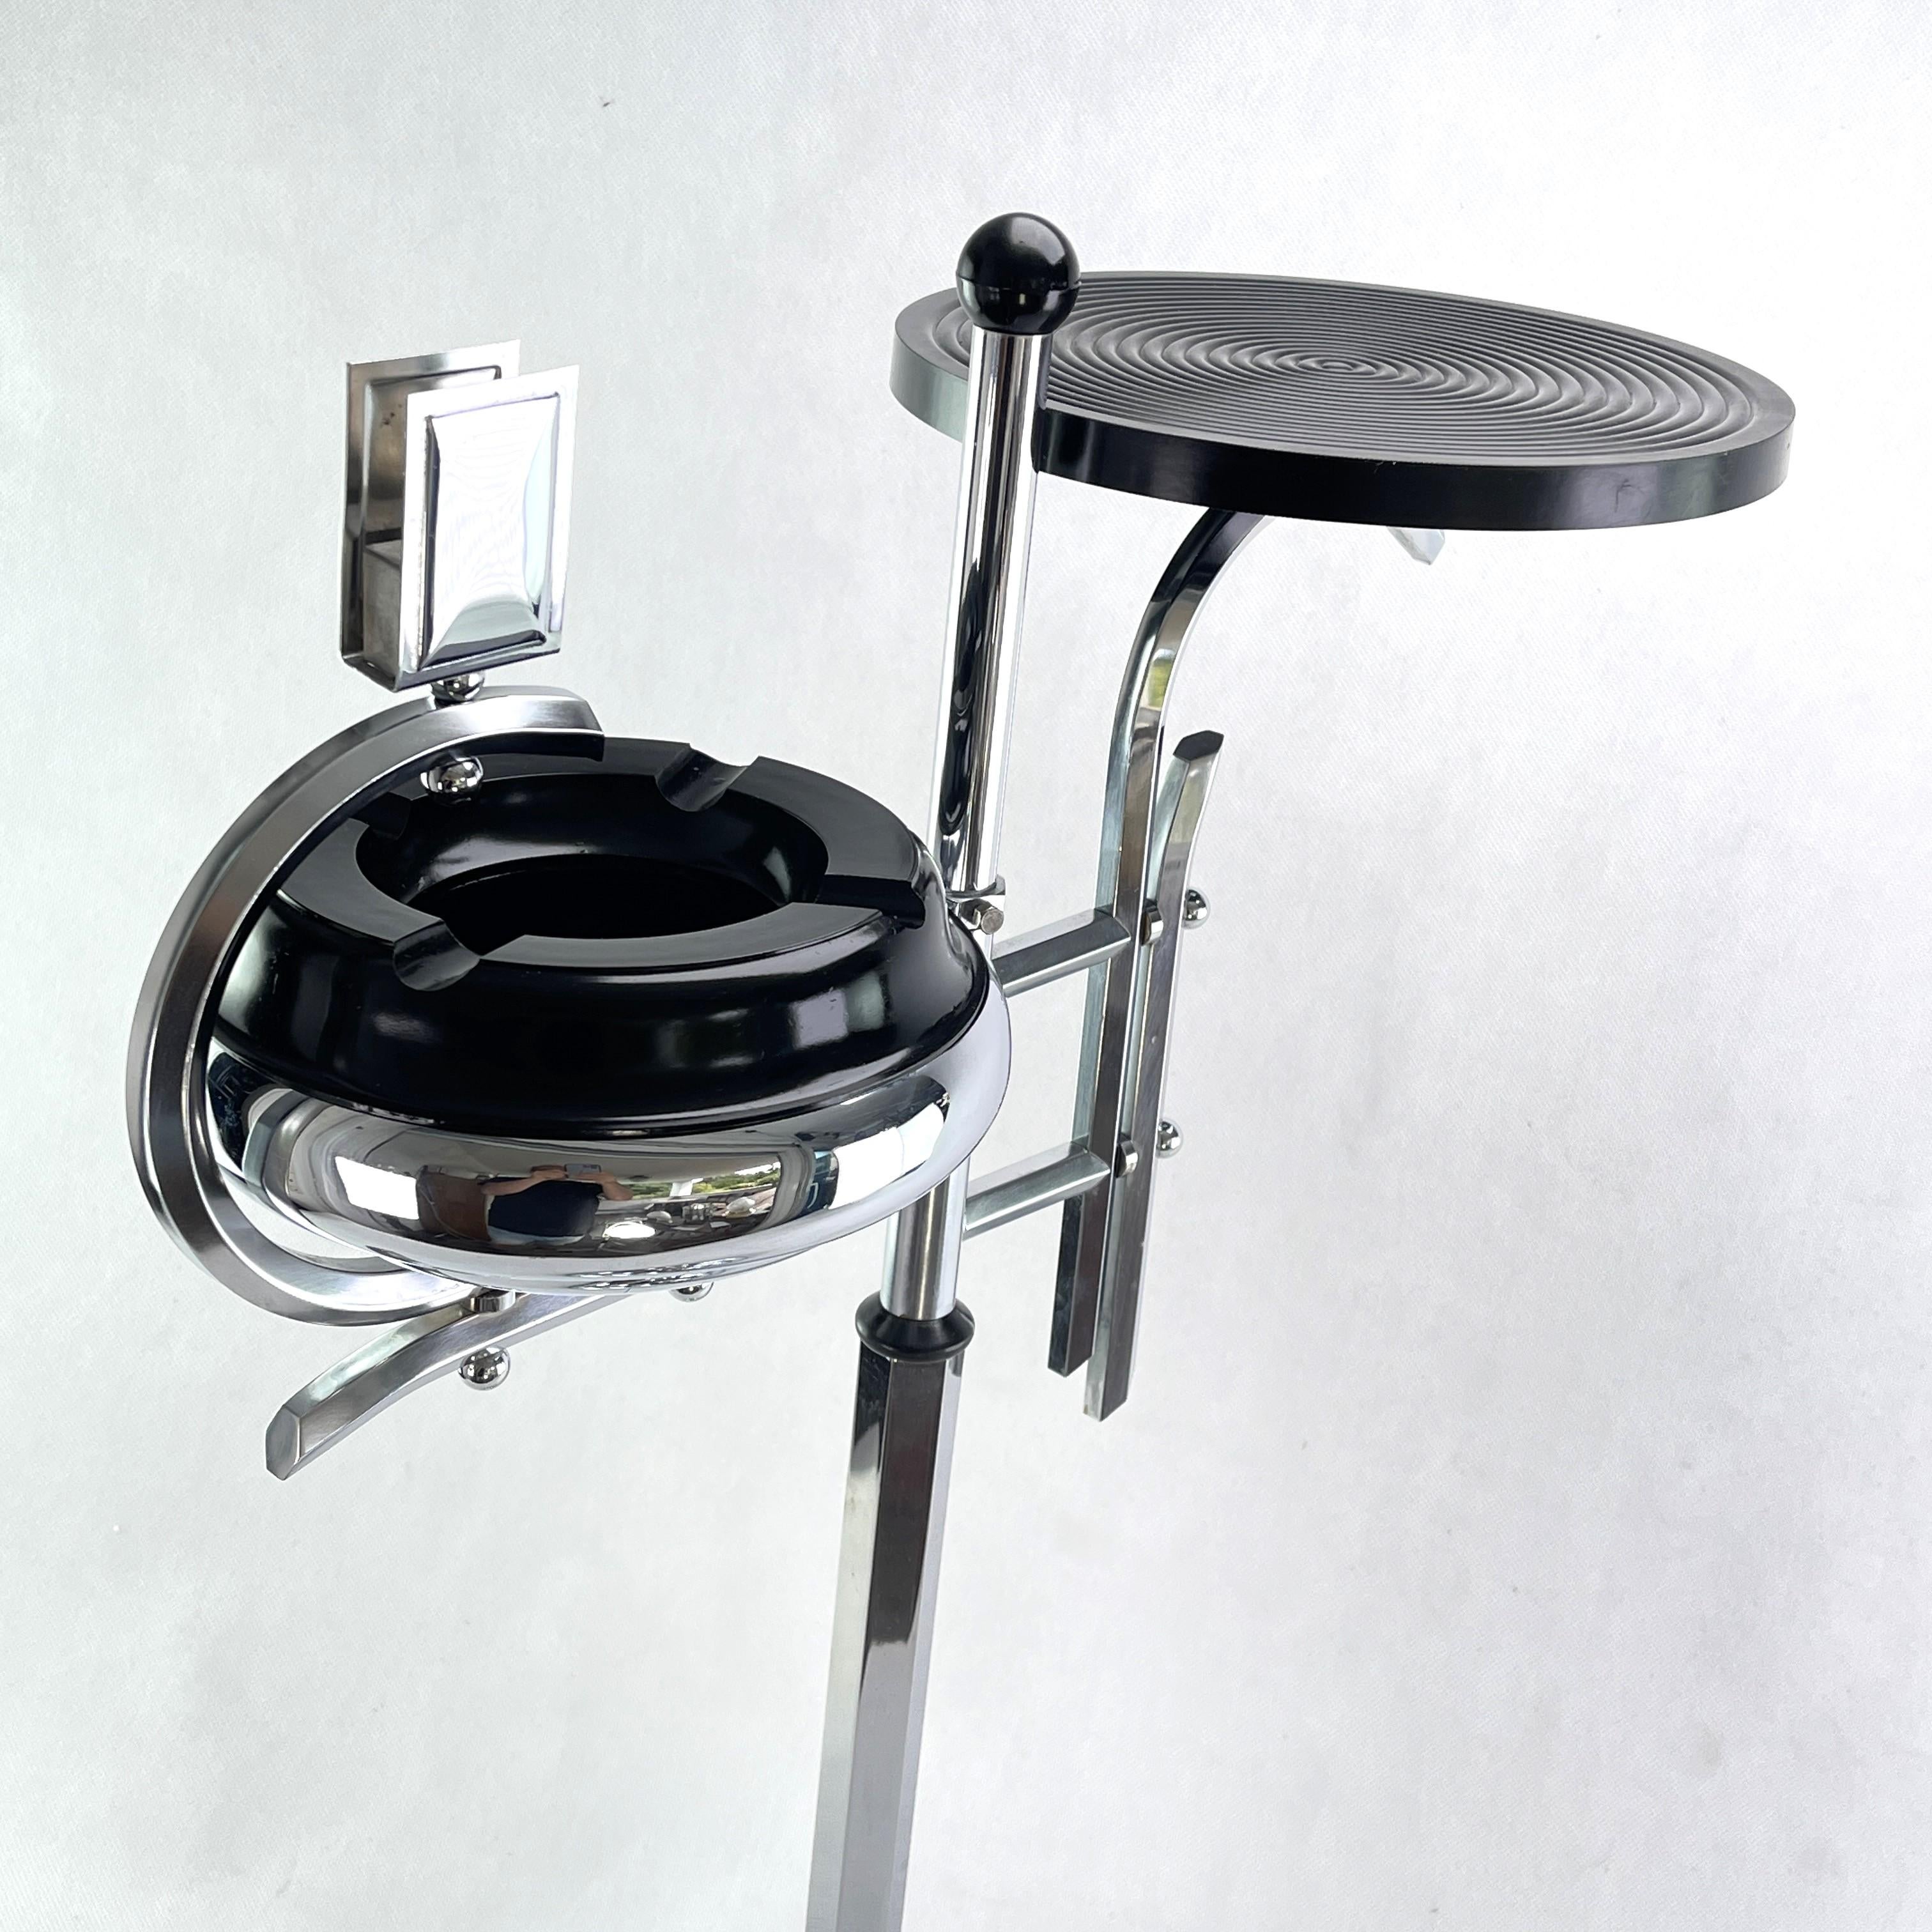 Belgian Art Deco Ashtray Stand, Chrome and Bakelite by Demeyere, Belgium, 1930s For Sale